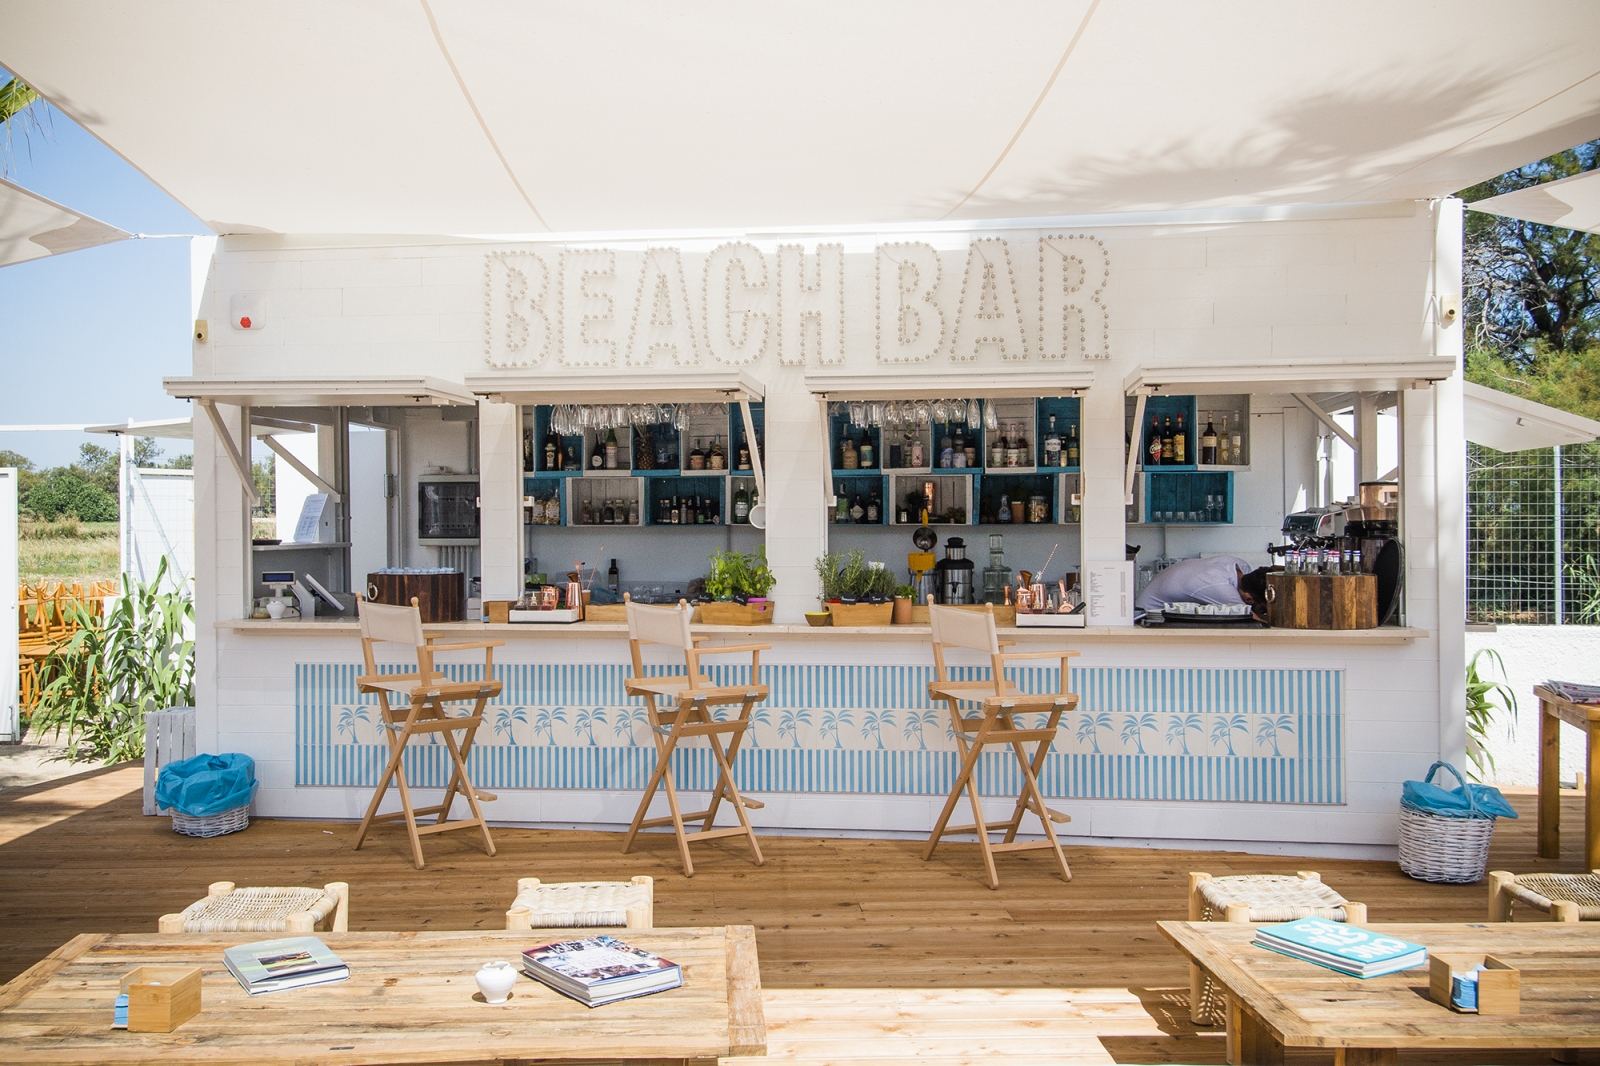 Beach bar at Le Palme at luxury hotel Masseria Torre Coccaro in Italy